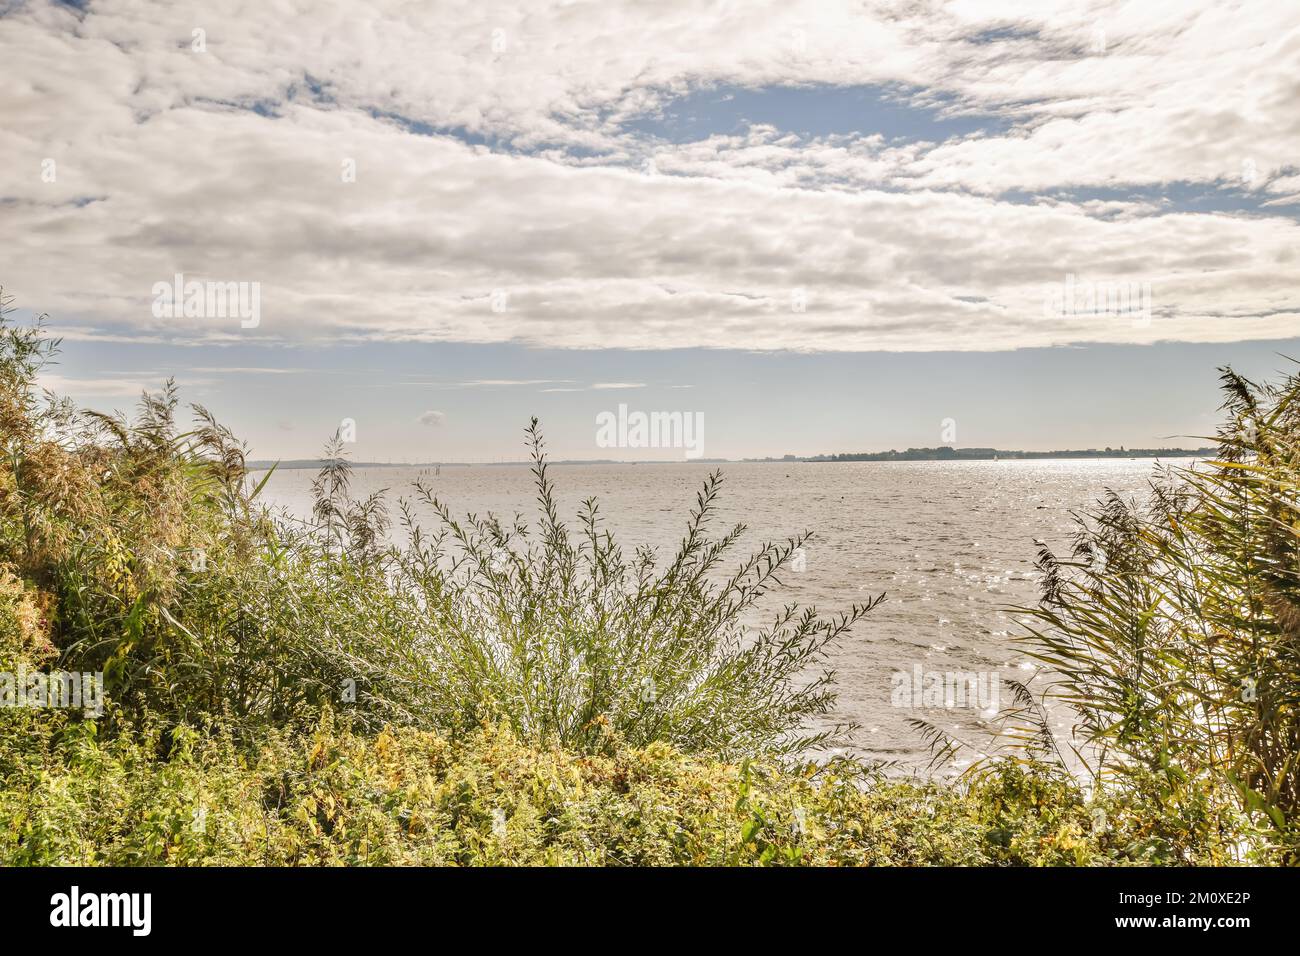 the ocean with clouds in the sky and some plants on the ground near the water, as seen from an overlook point Stock Photo